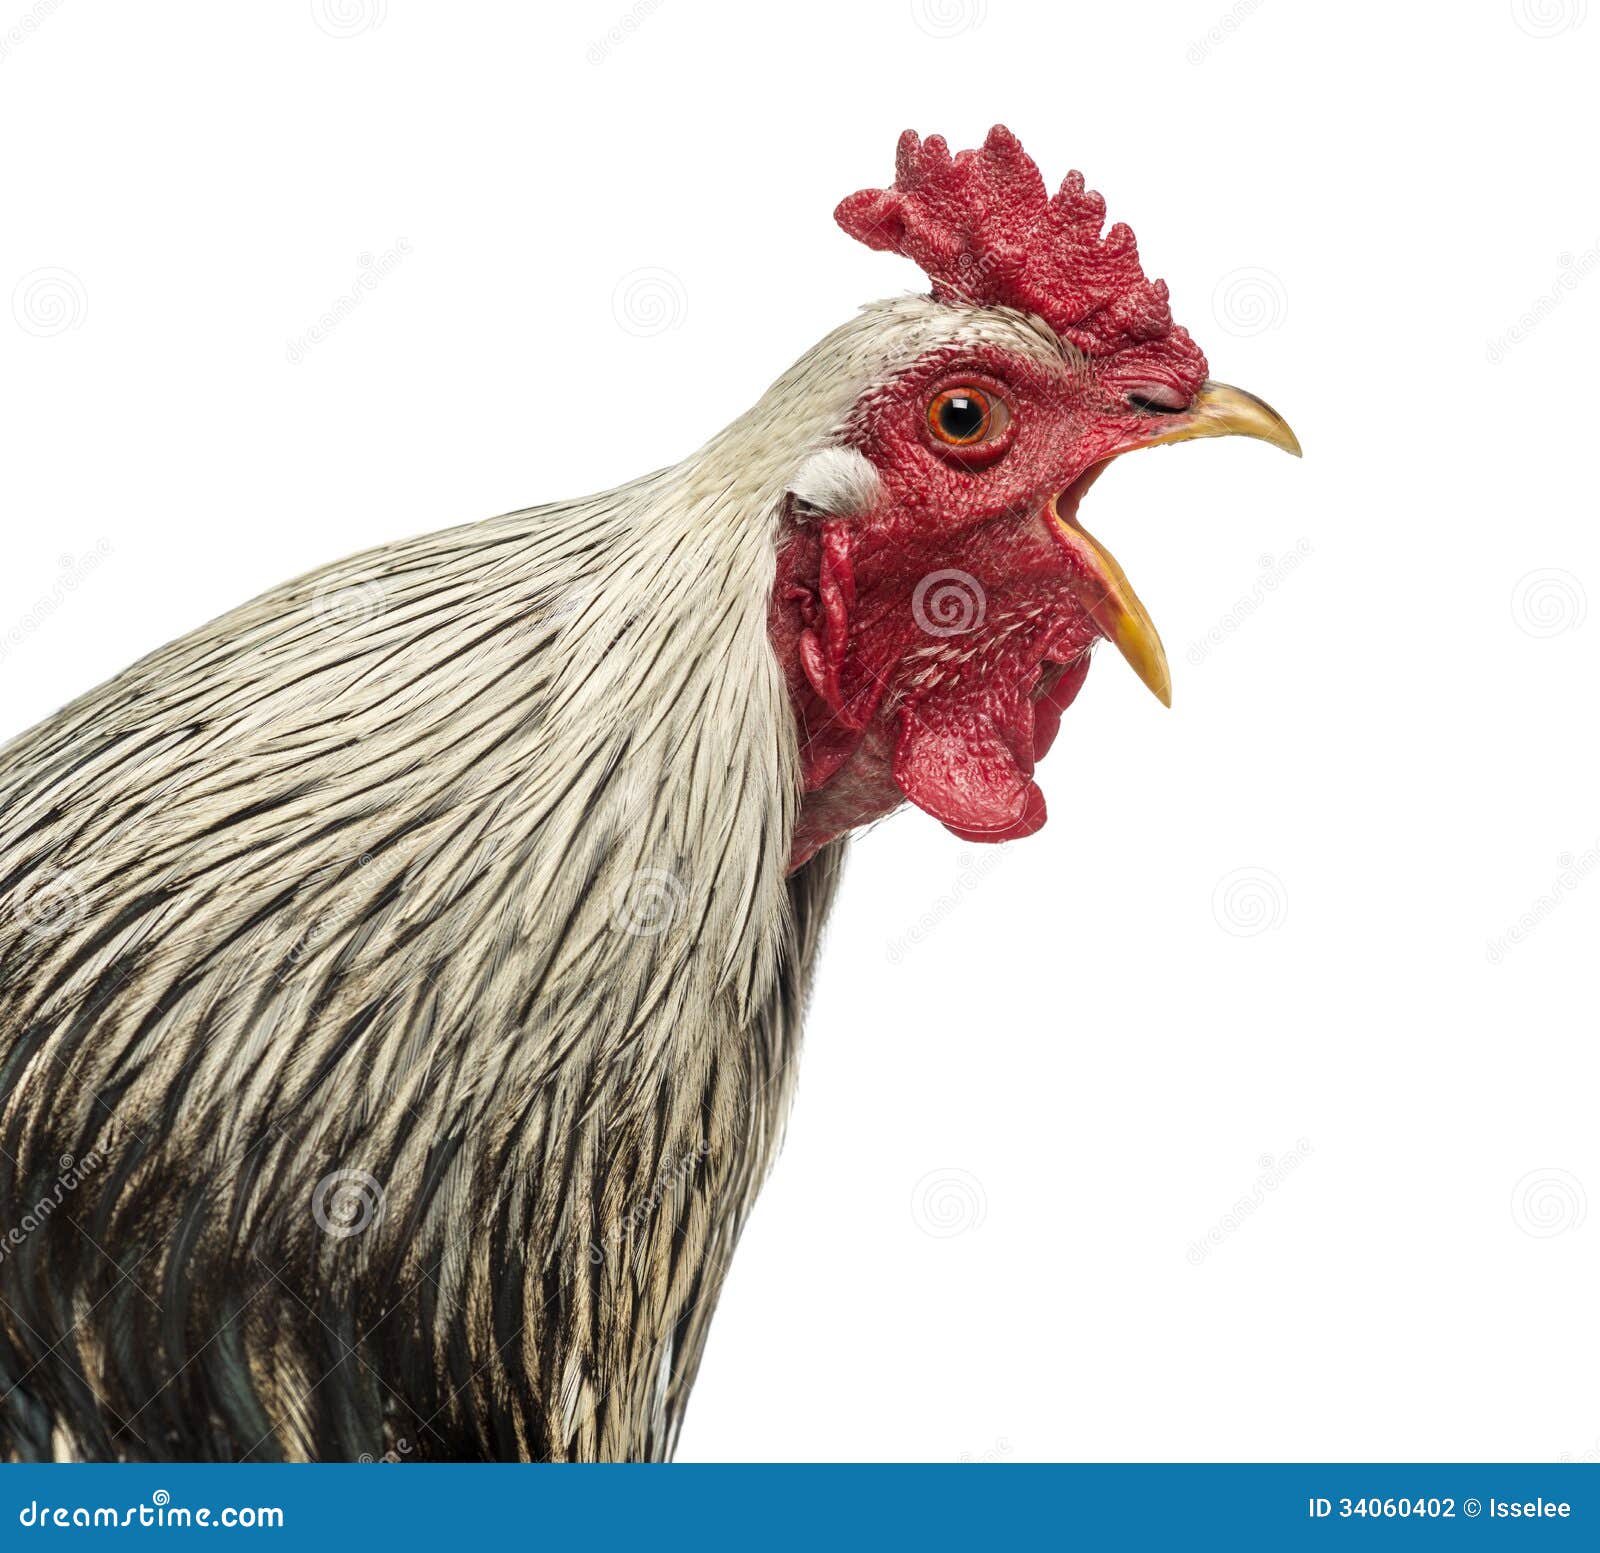 close up of a brahma rooster crowing, 